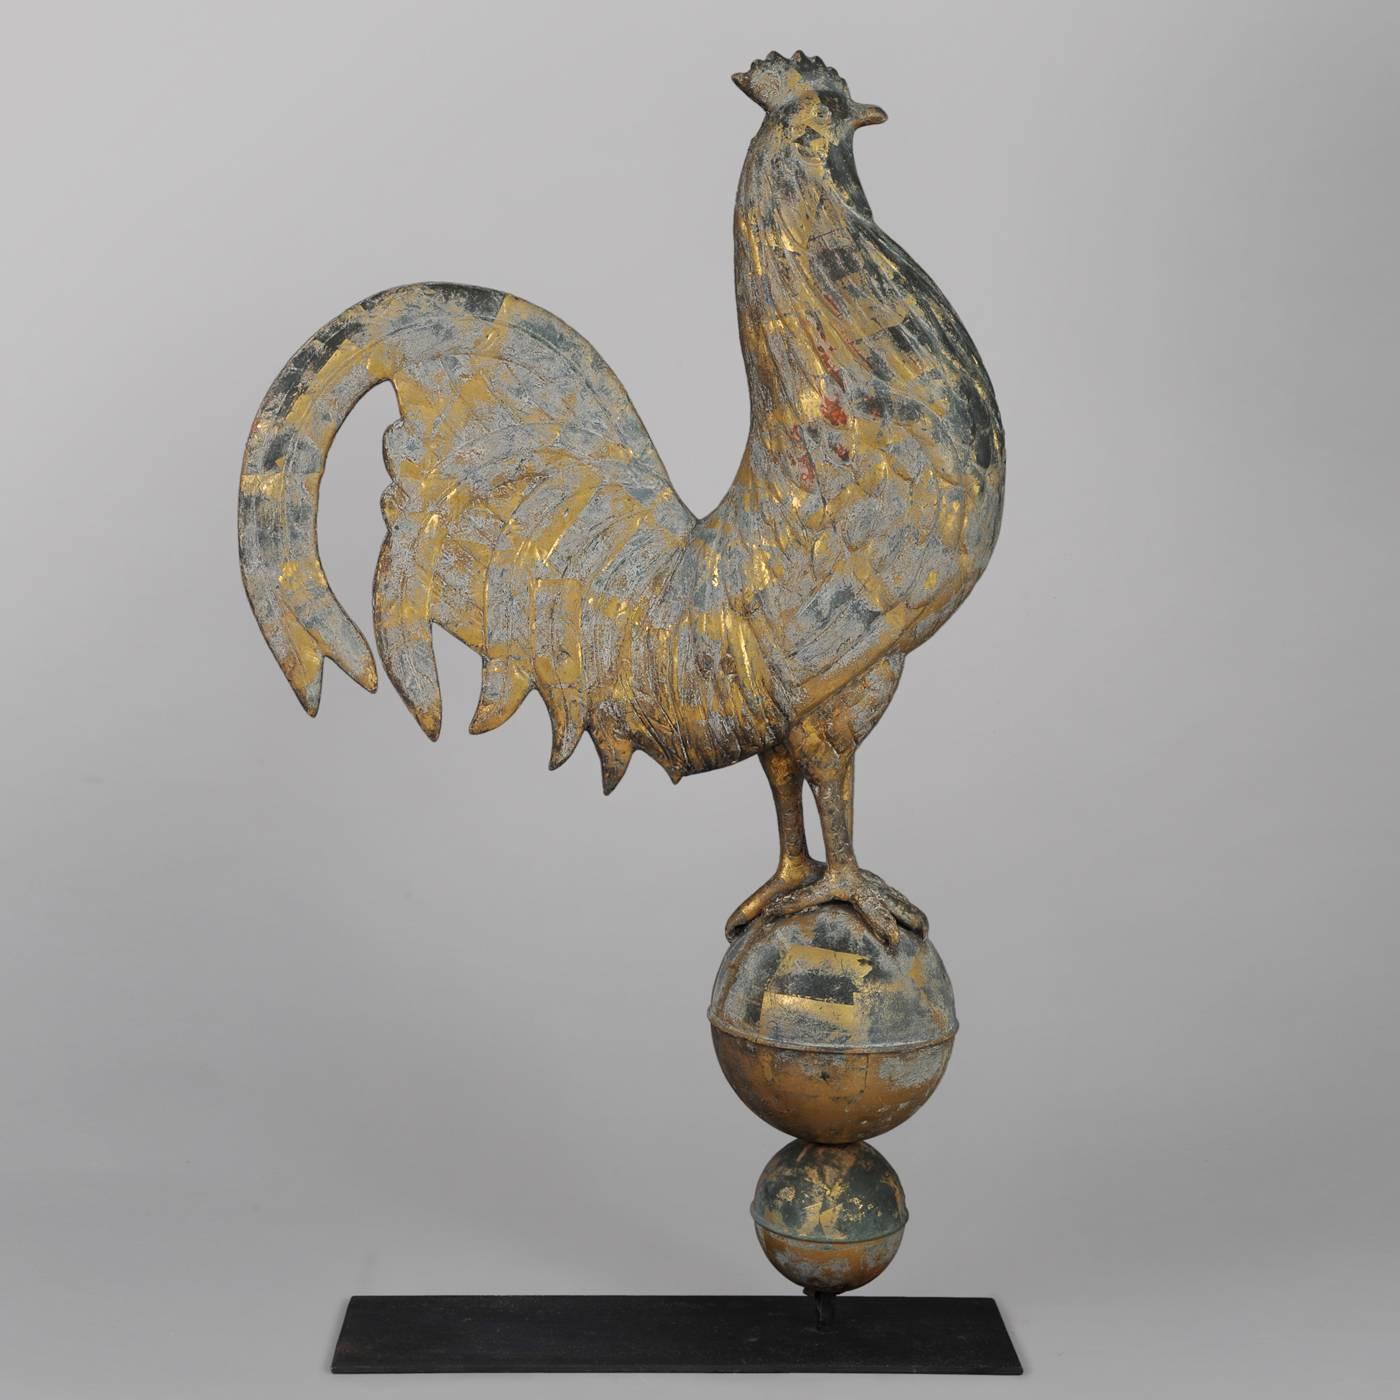 Probably Harris & Company, Boston, Massachusetts, circa 1880-1900.
Full-body copper, copper sphere.
Classic example of a Hamburg rooster having a full-chest perched on a sphere.
Wonderful condition. Original oxidized gilt surface with traces of